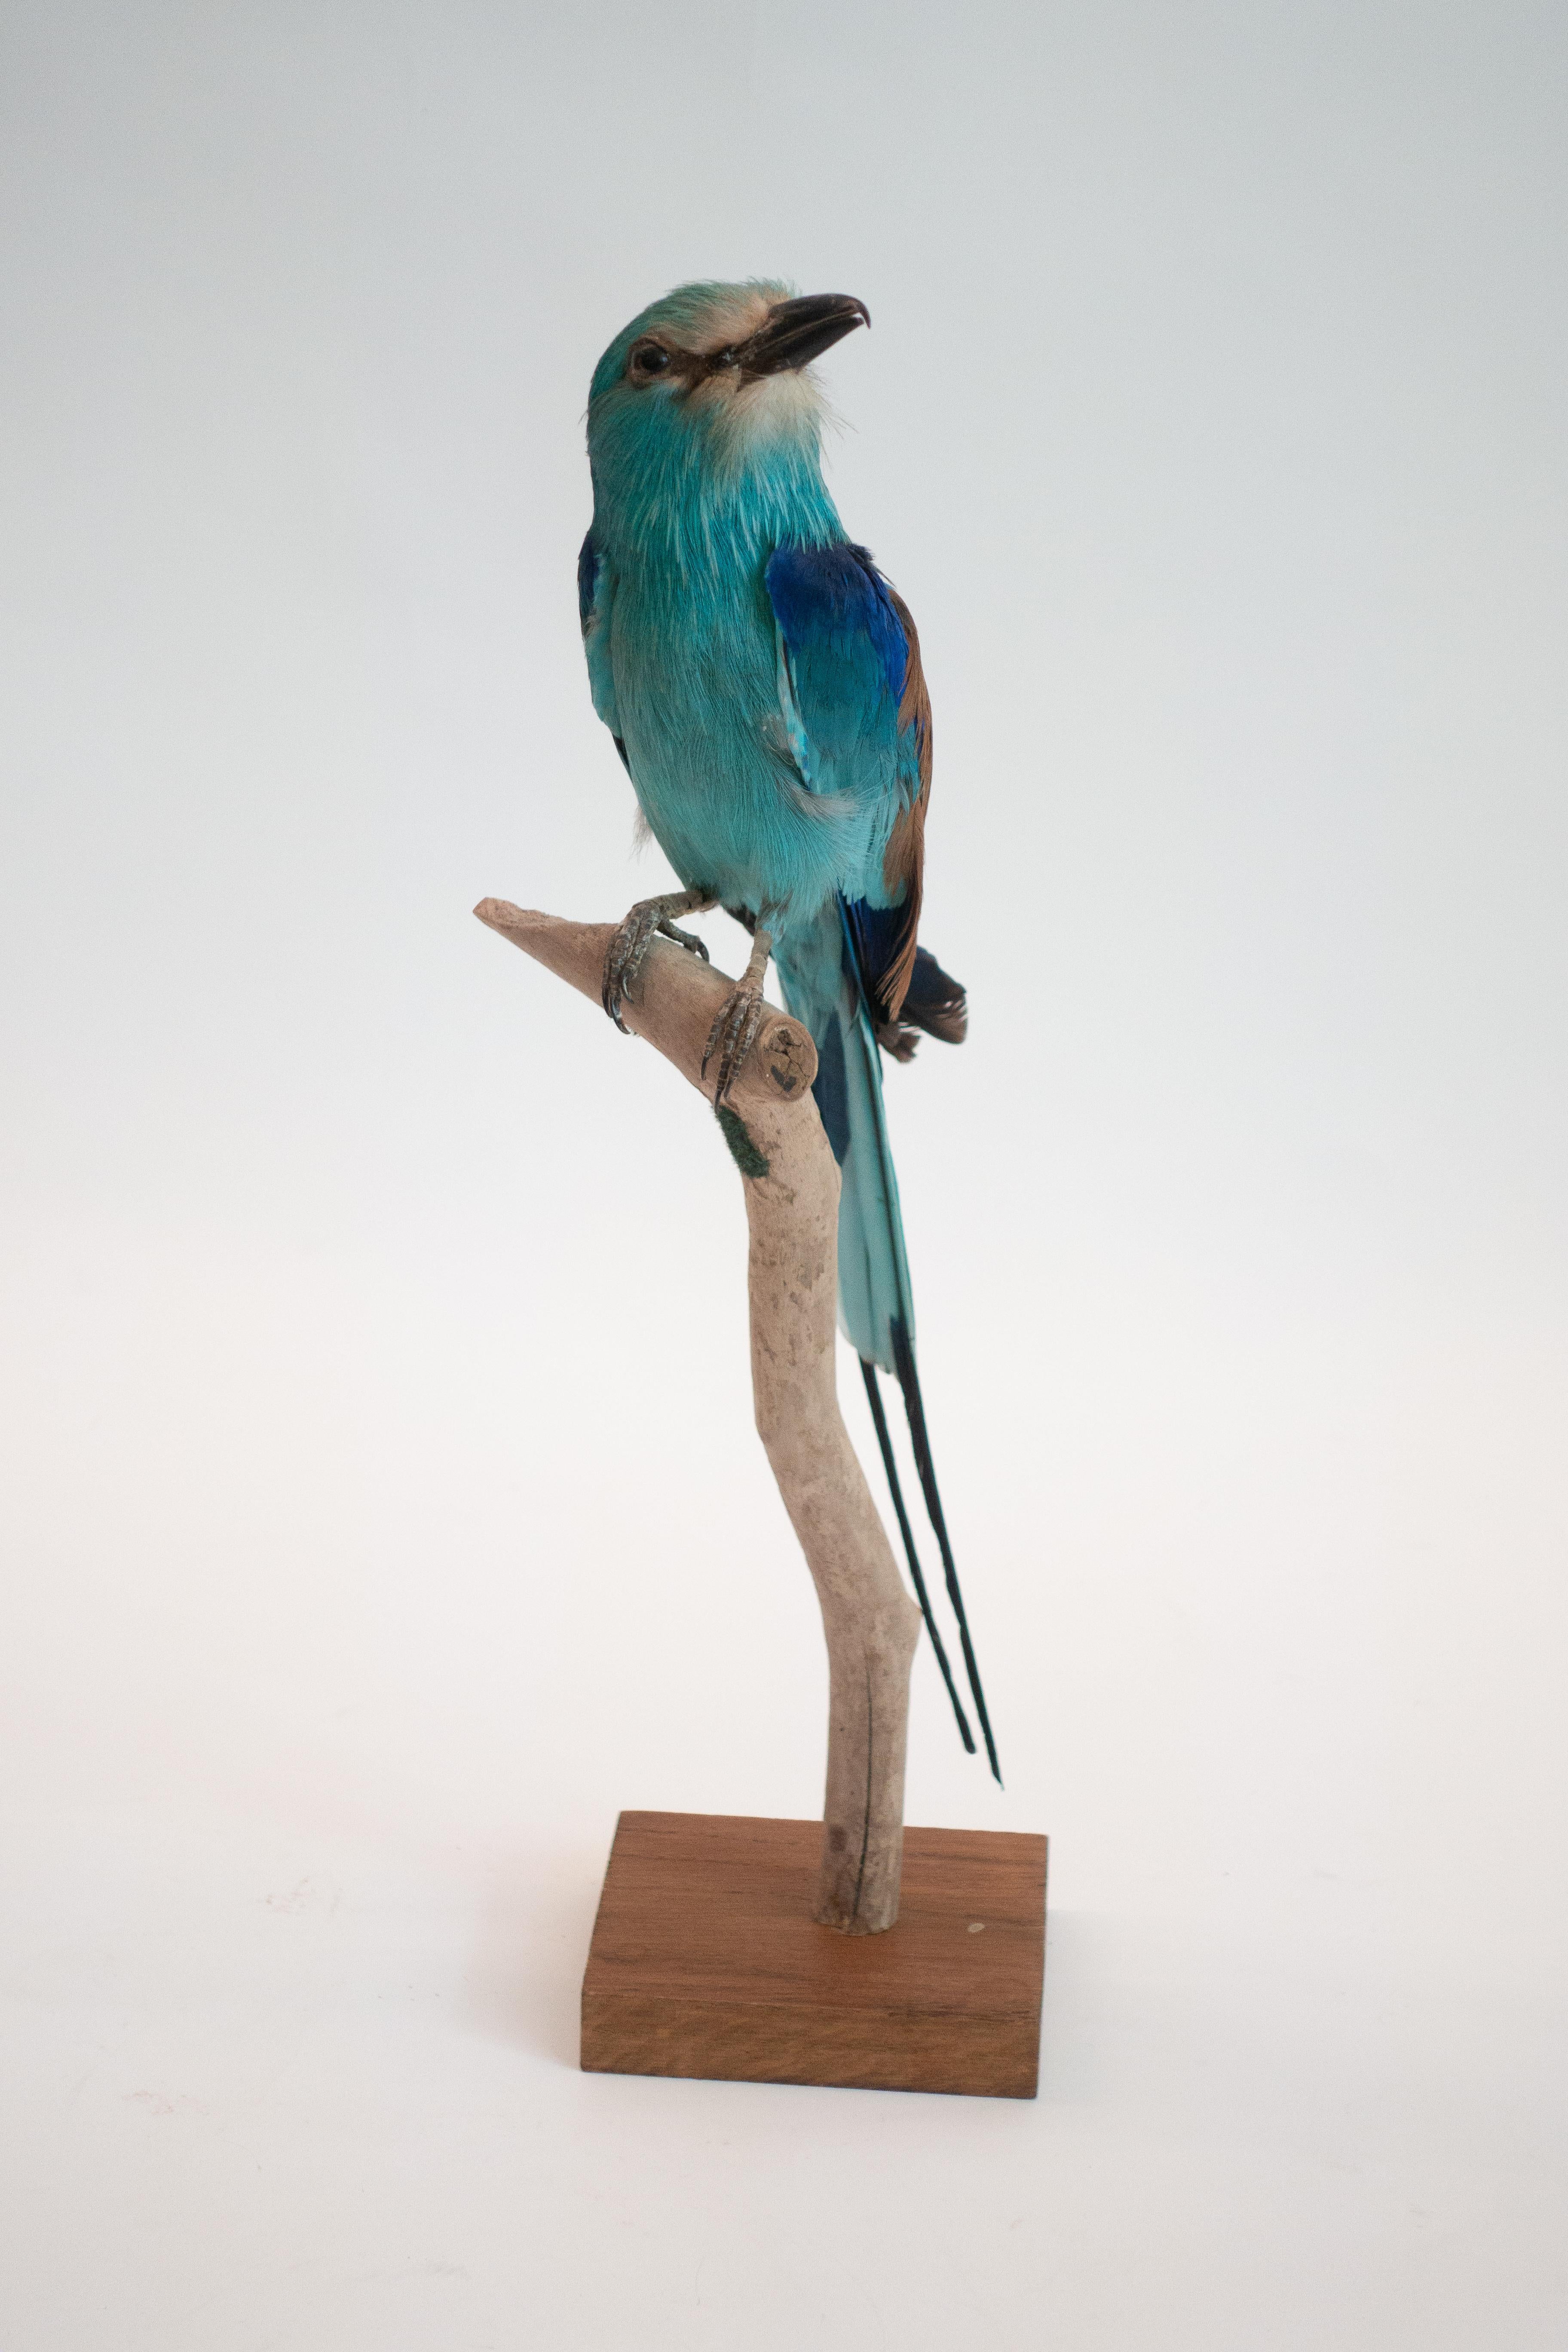 The European roller is the only member of the roller family of birds to breed in Europe. Its overall range extends into the Middle East, Central Asia and Morocco. The European roller is found in a wide variety of habitats, including the Upper East